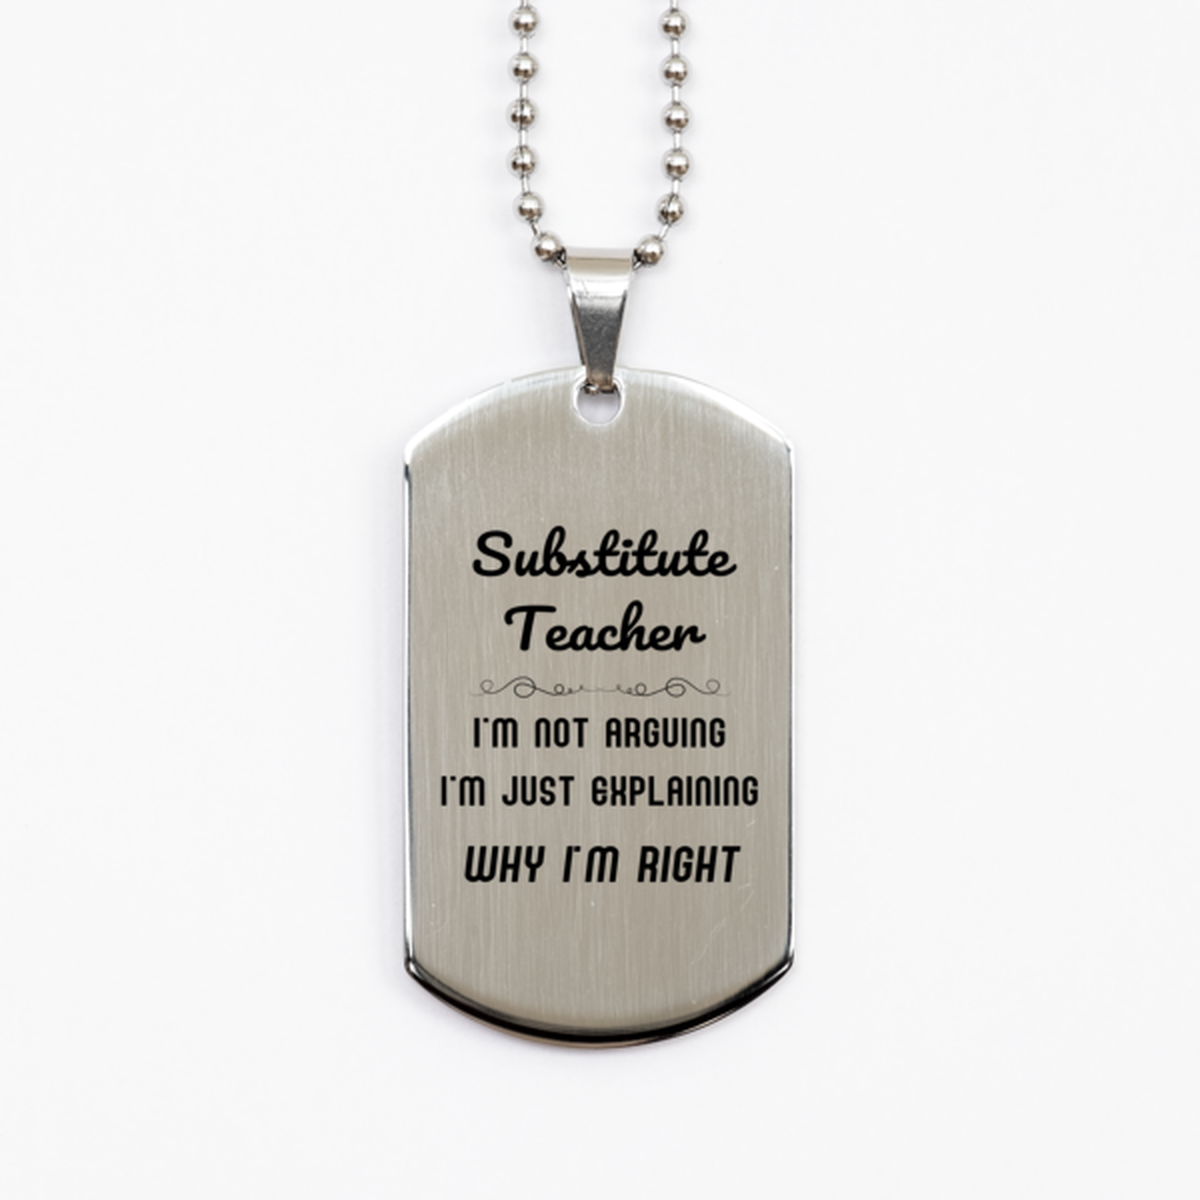 Substitute Teacher I'm not Arguing. I'm Just Explaining Why I'm RIGHT Silver Dog Tag, Funny Saying Quote Substitute Teacher Gifts For Substitute Teacher Graduation Birthday Christmas Gifts for Men Women Coworker